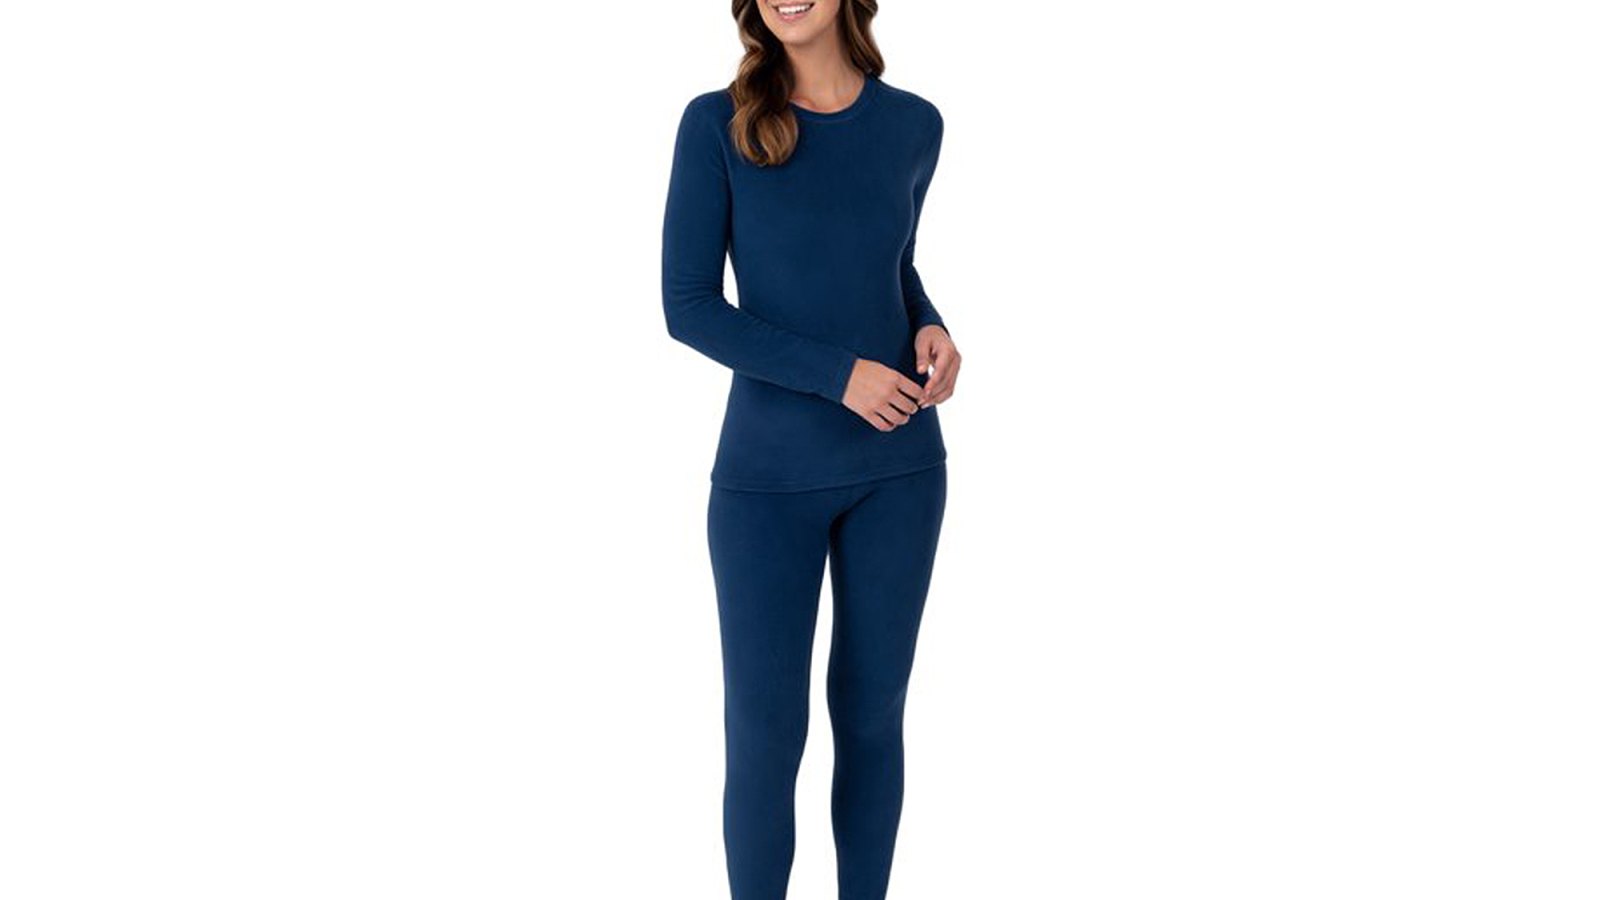 Fruit of the Loom Women's Stretch Fleece Thermal Top and Bottom Set